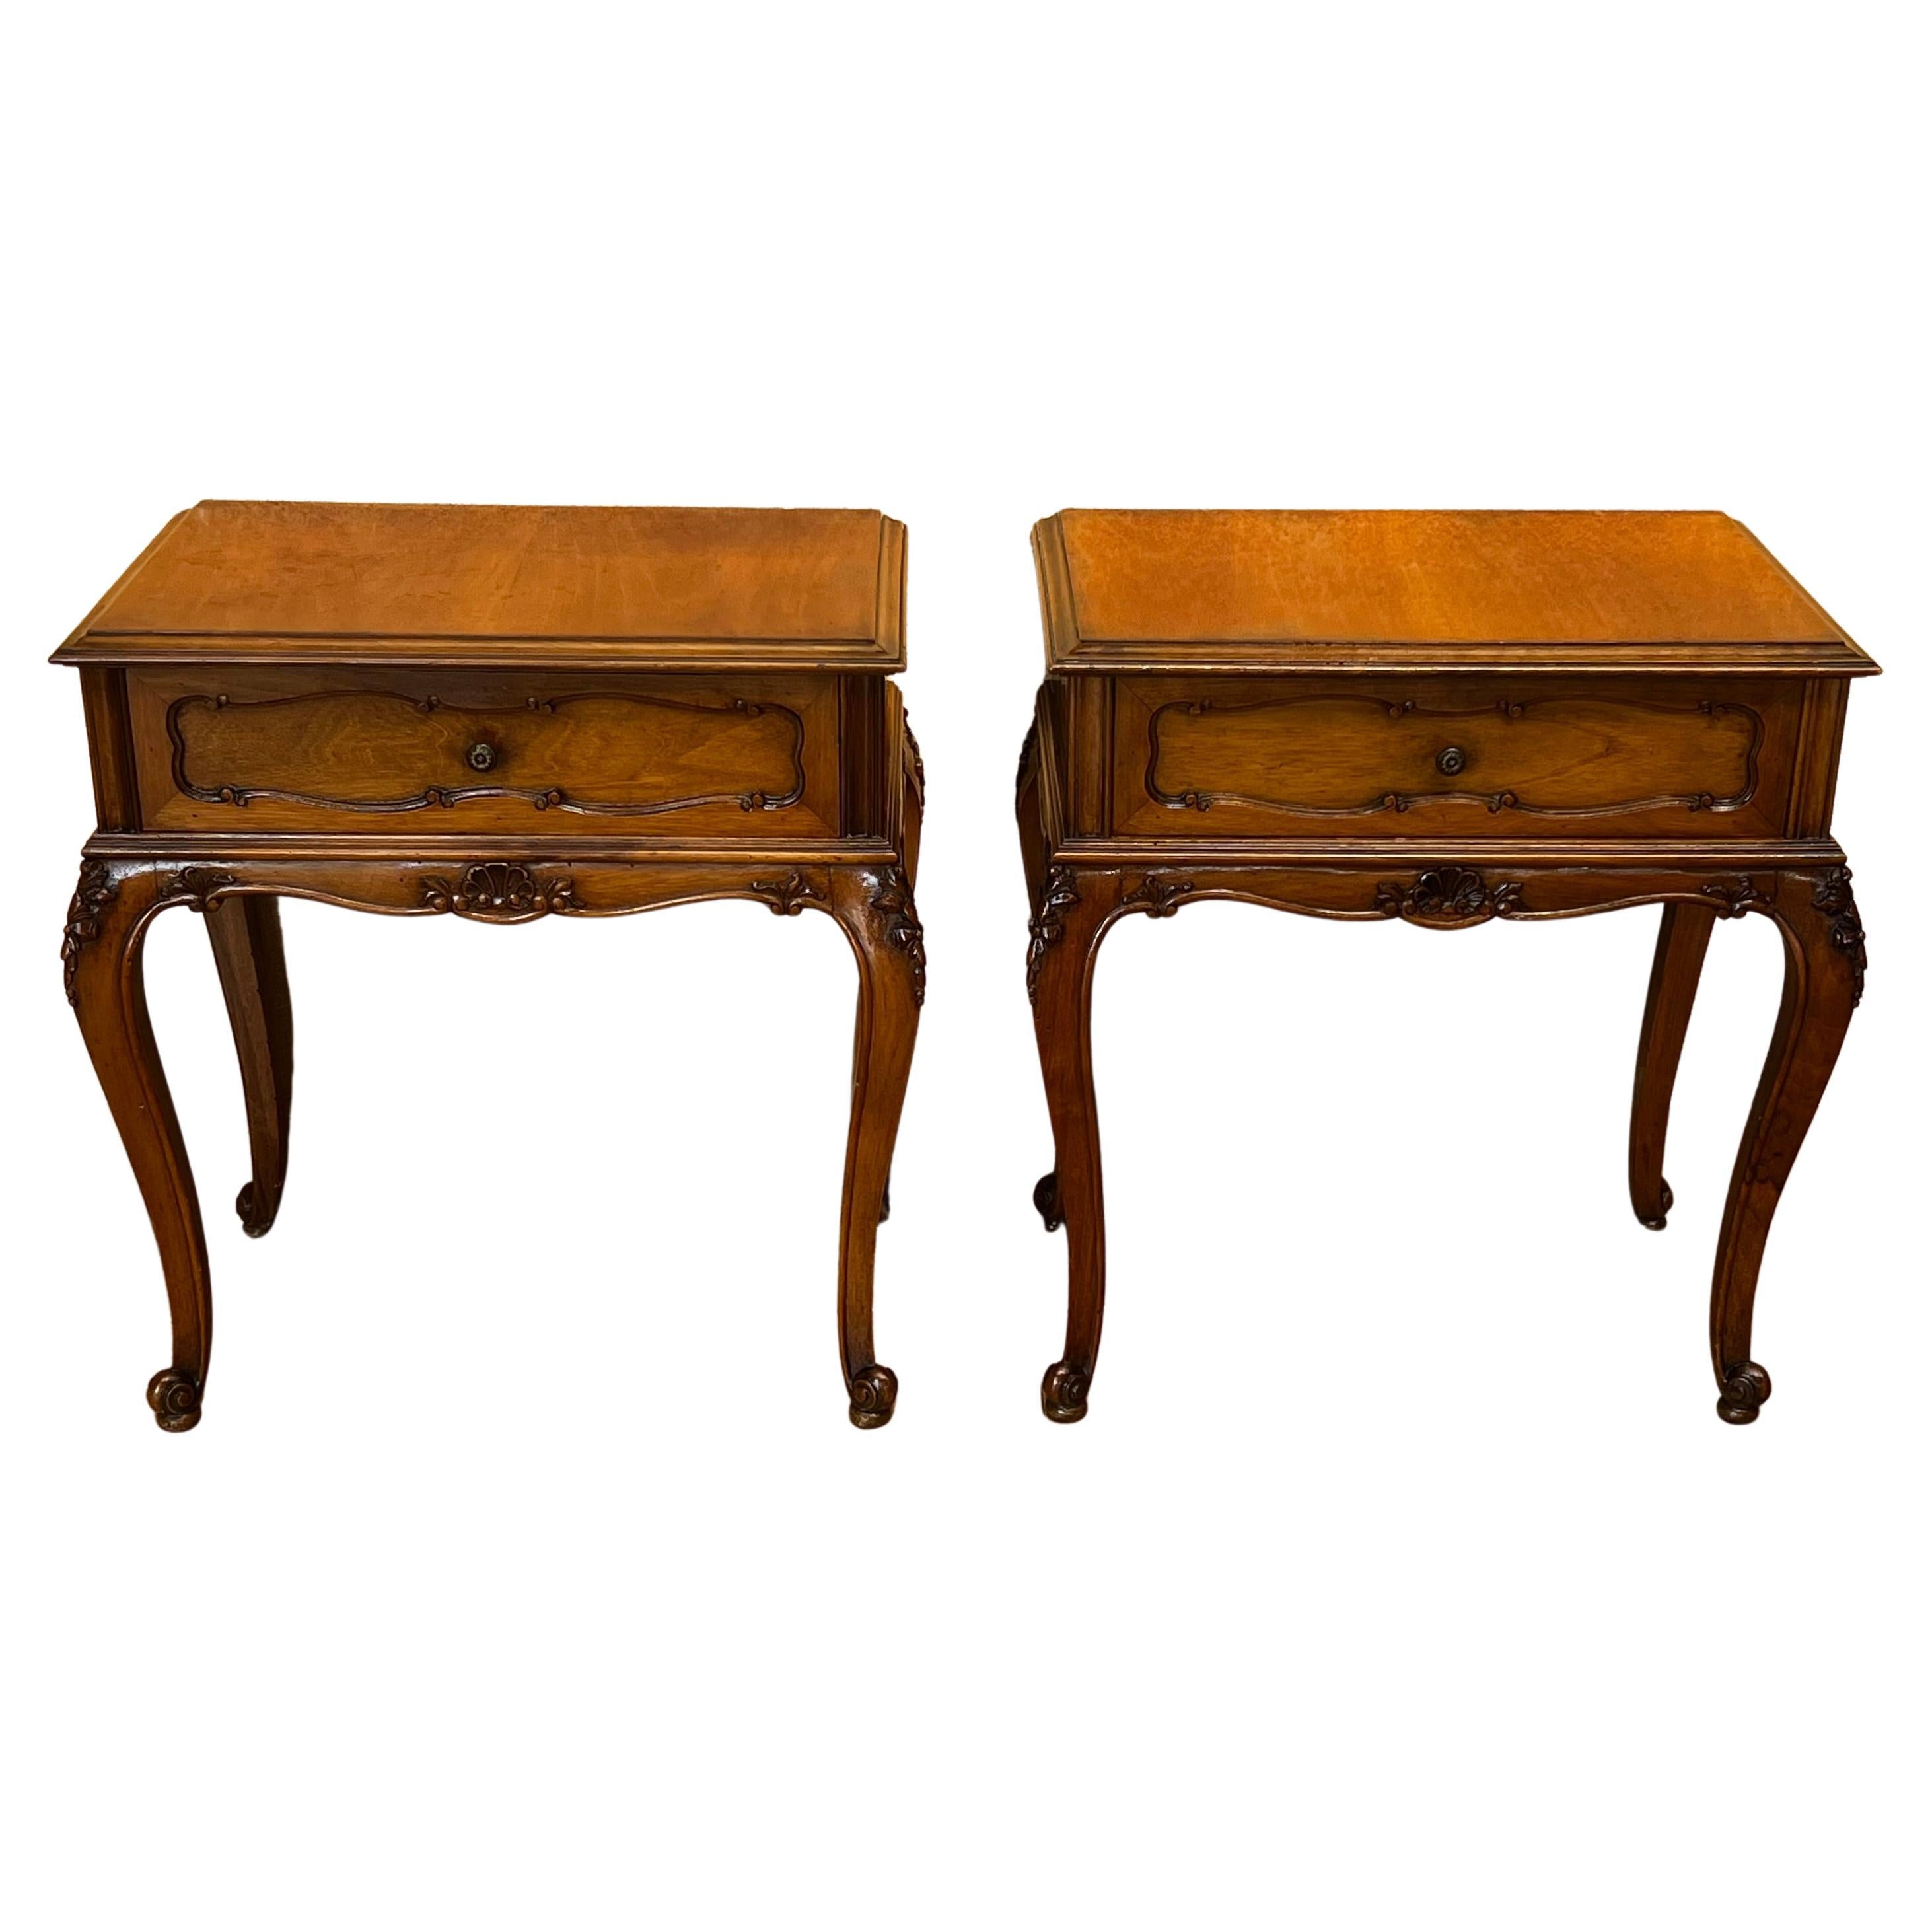 20th Century Pair of French Nightstands with One-Drawer and Cabriole Legs